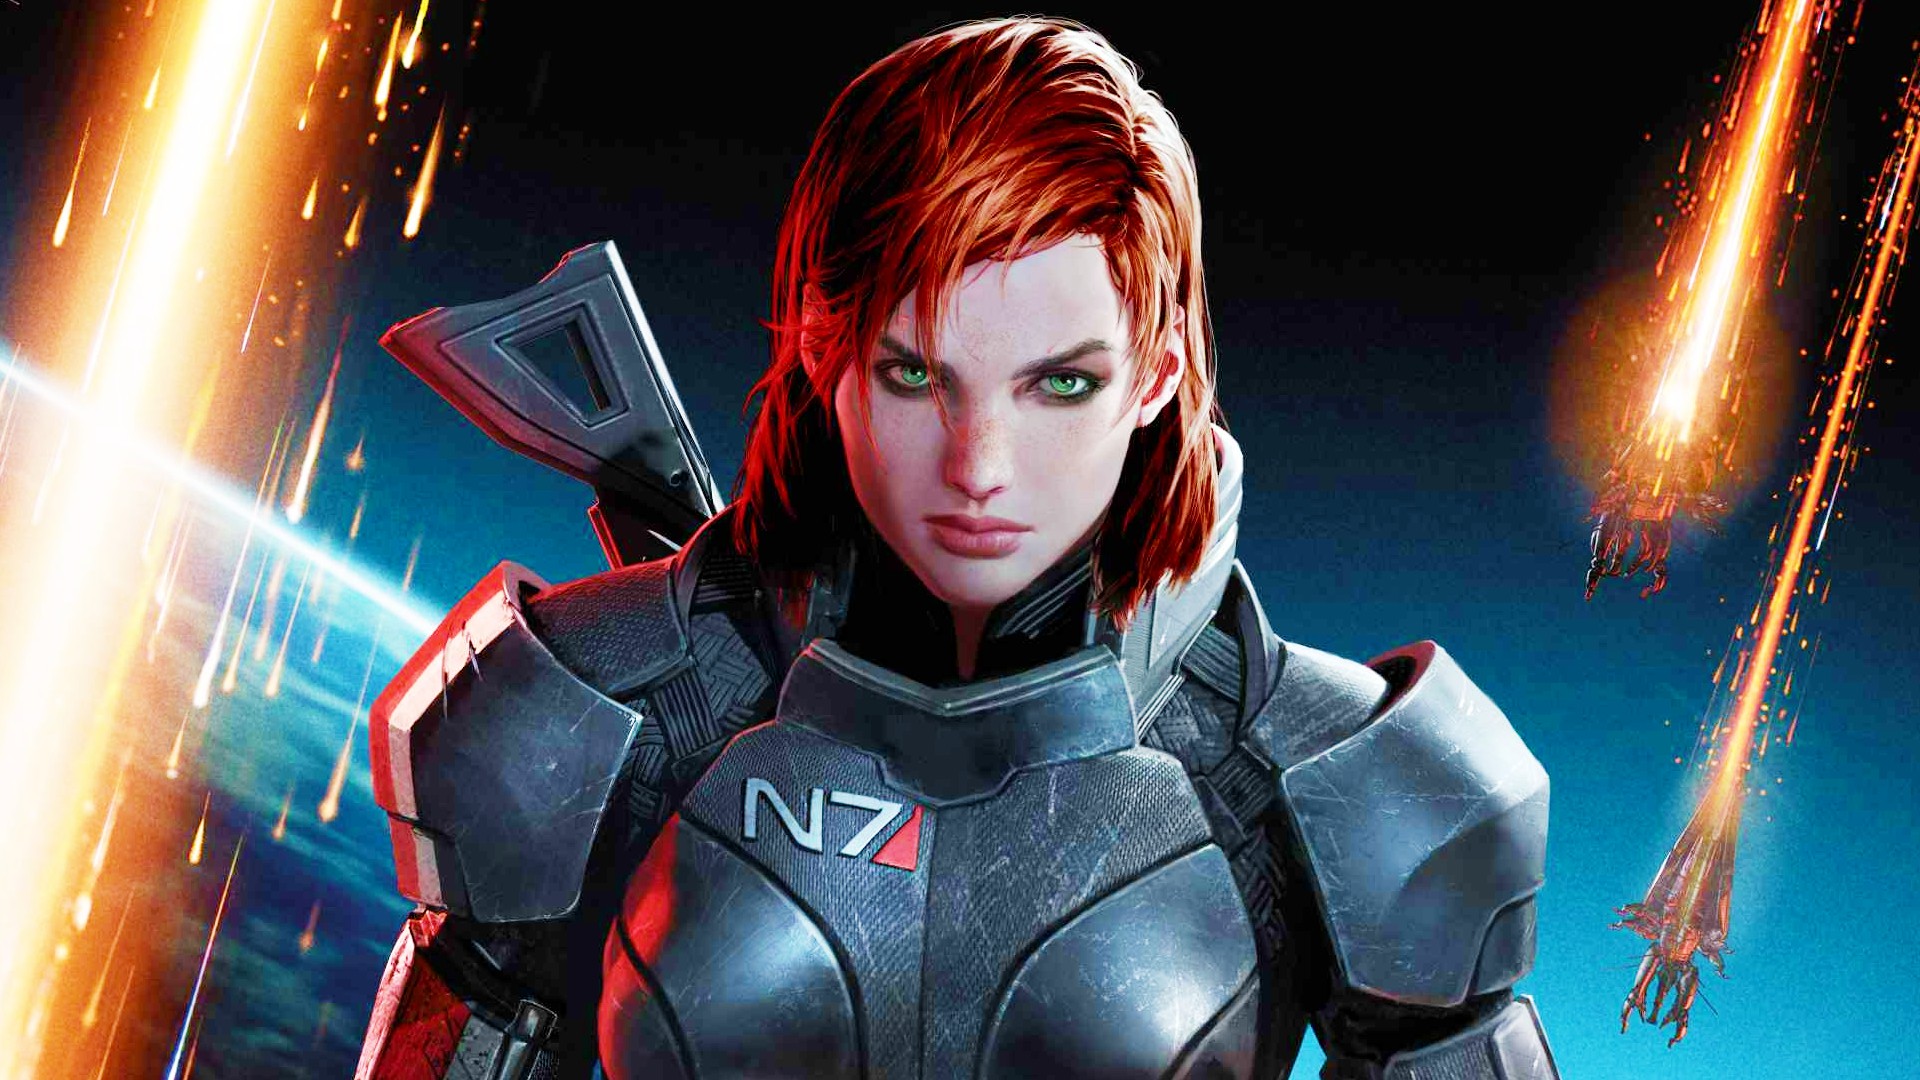 Mass Effect 3 remade and remastered in gigantic mod for Bioware's RPG